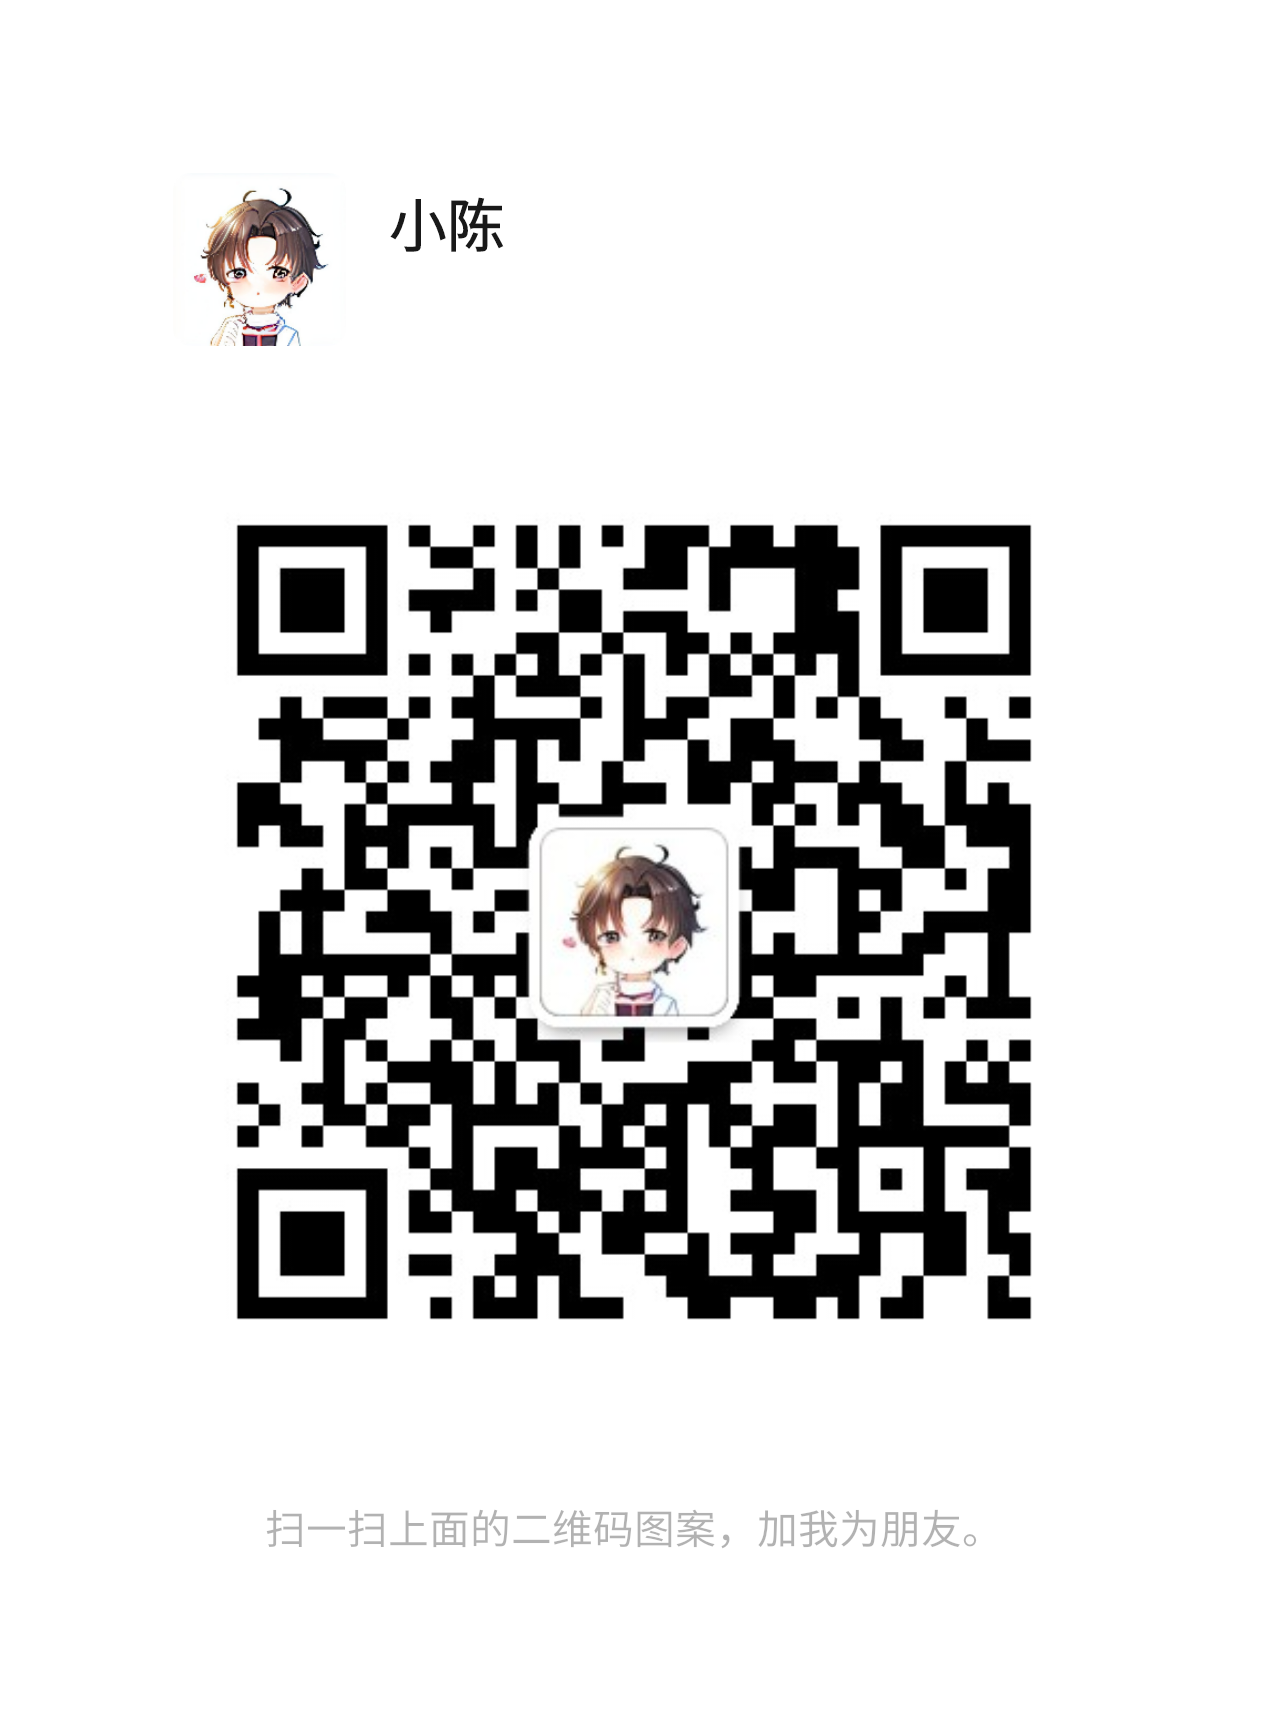 mmqrcode1714236727562.png